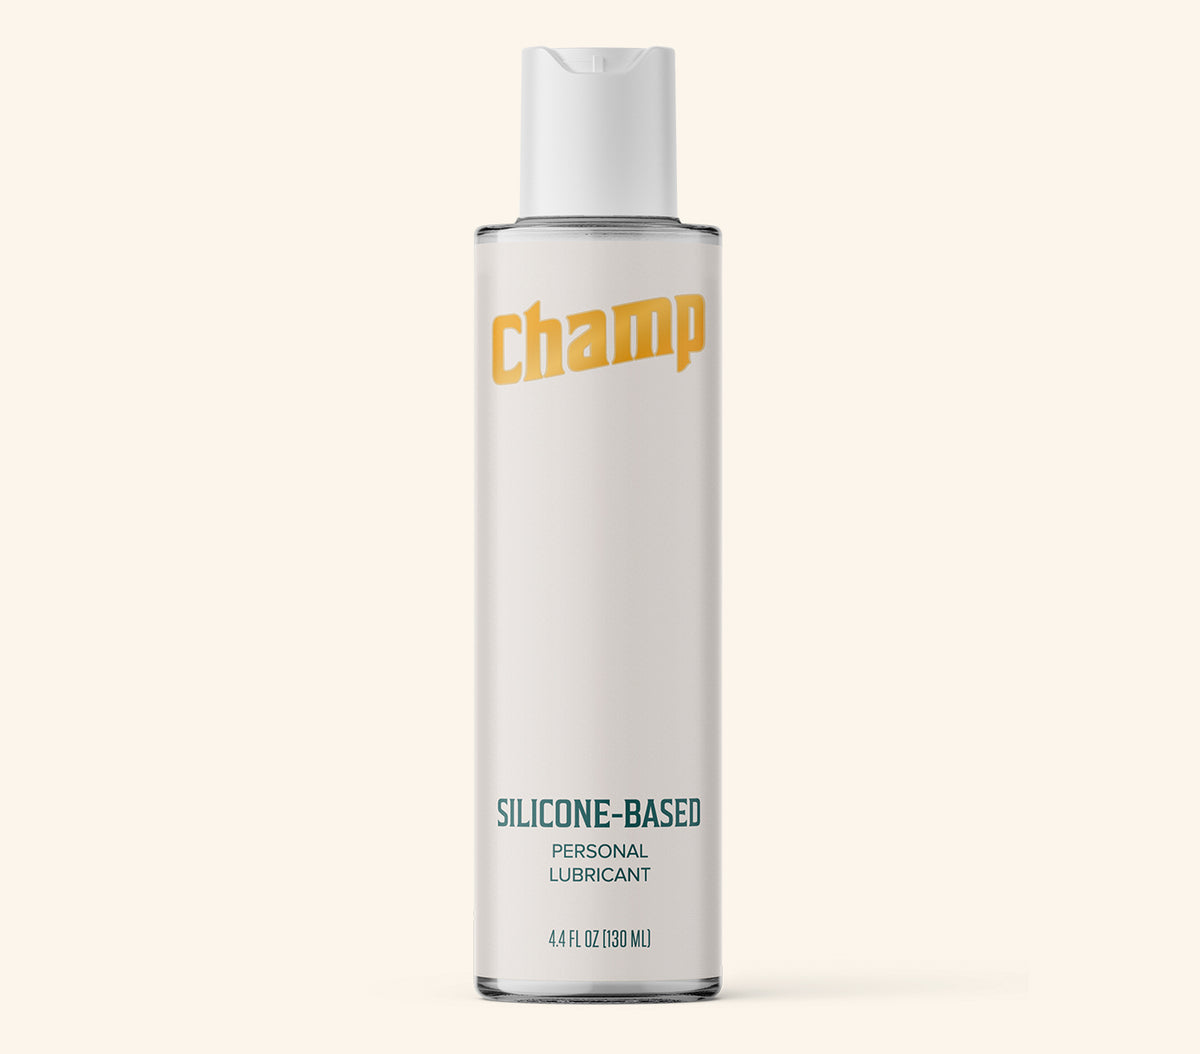 Silicone-Based Lubricant, Champ